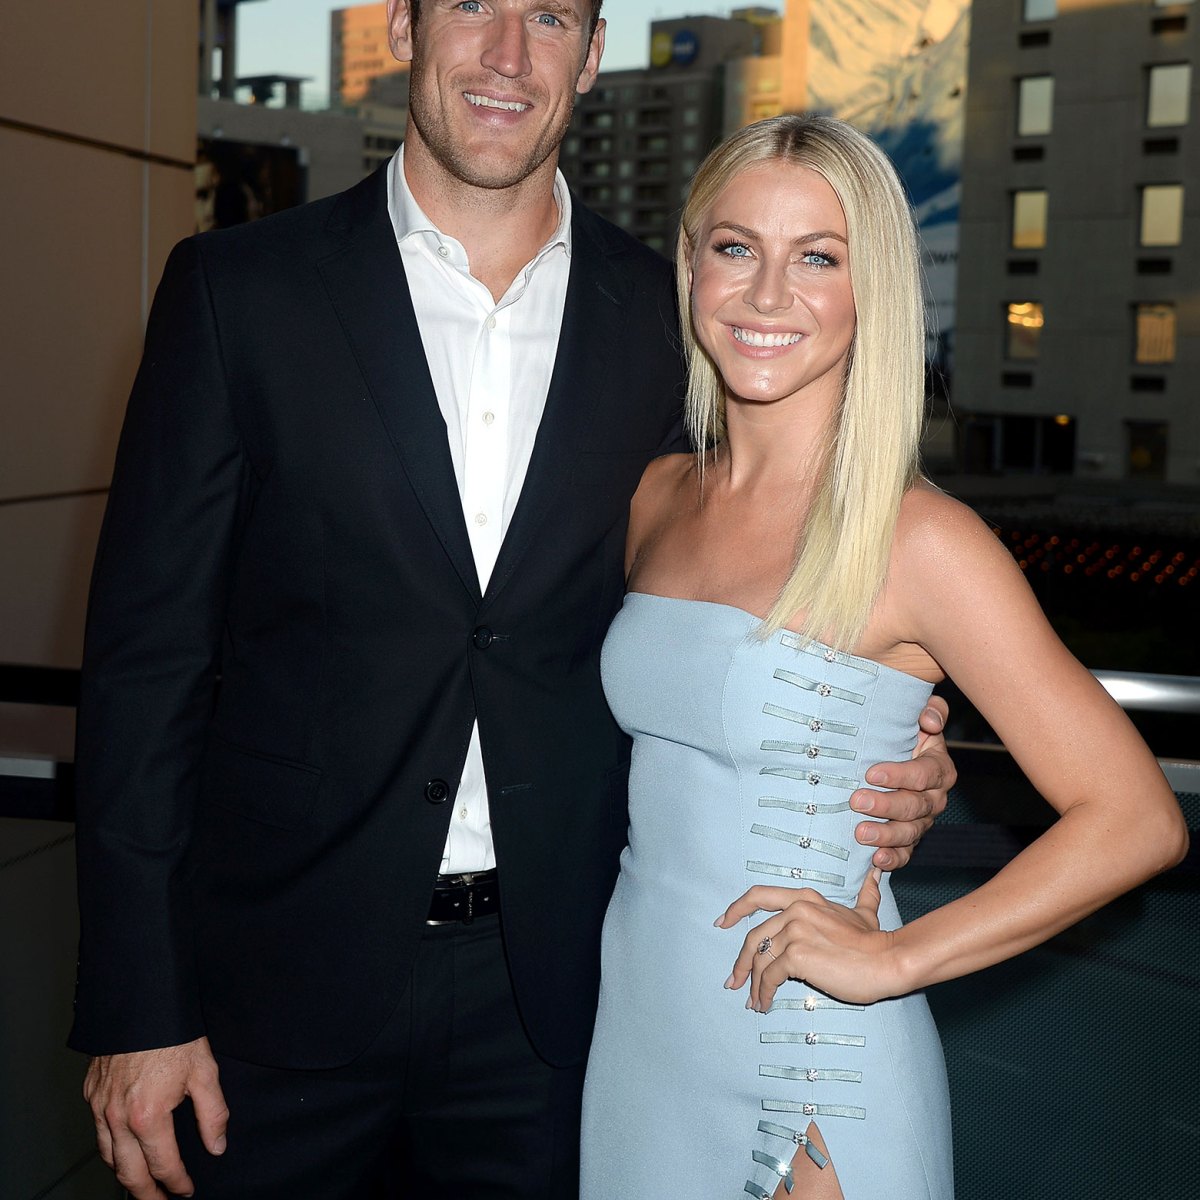 Former #NHL player #BrooksLaich has remained friendly with his ex-wife, brooks laich julianne hough